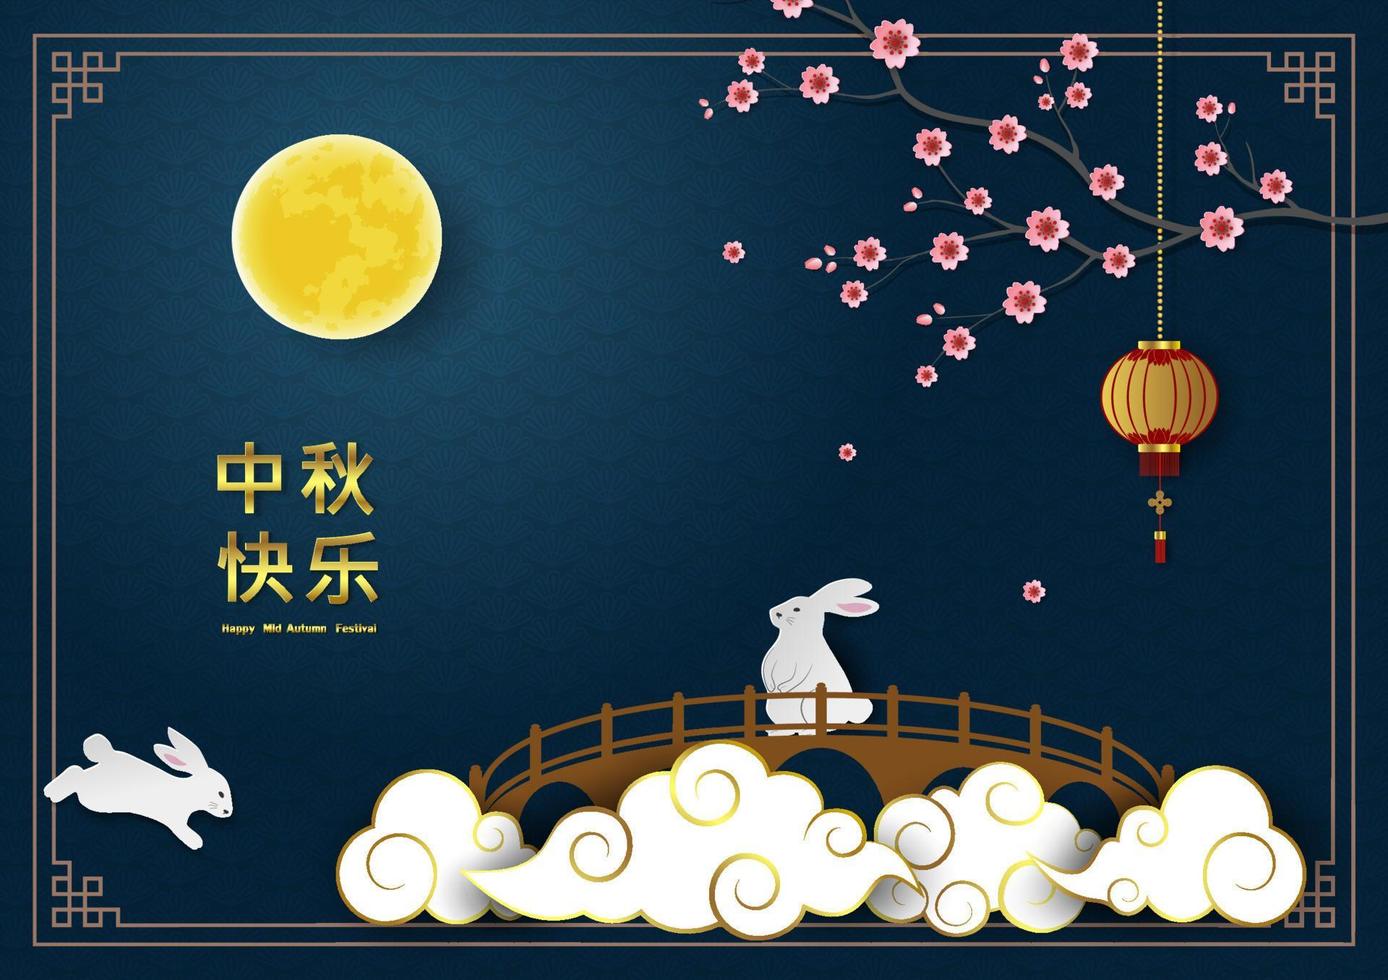 Mid Autumn Festival,celebrate theme with full moon,cute rabbits,cherry blossom,lantern,chinese text and cloud on night scene background vector